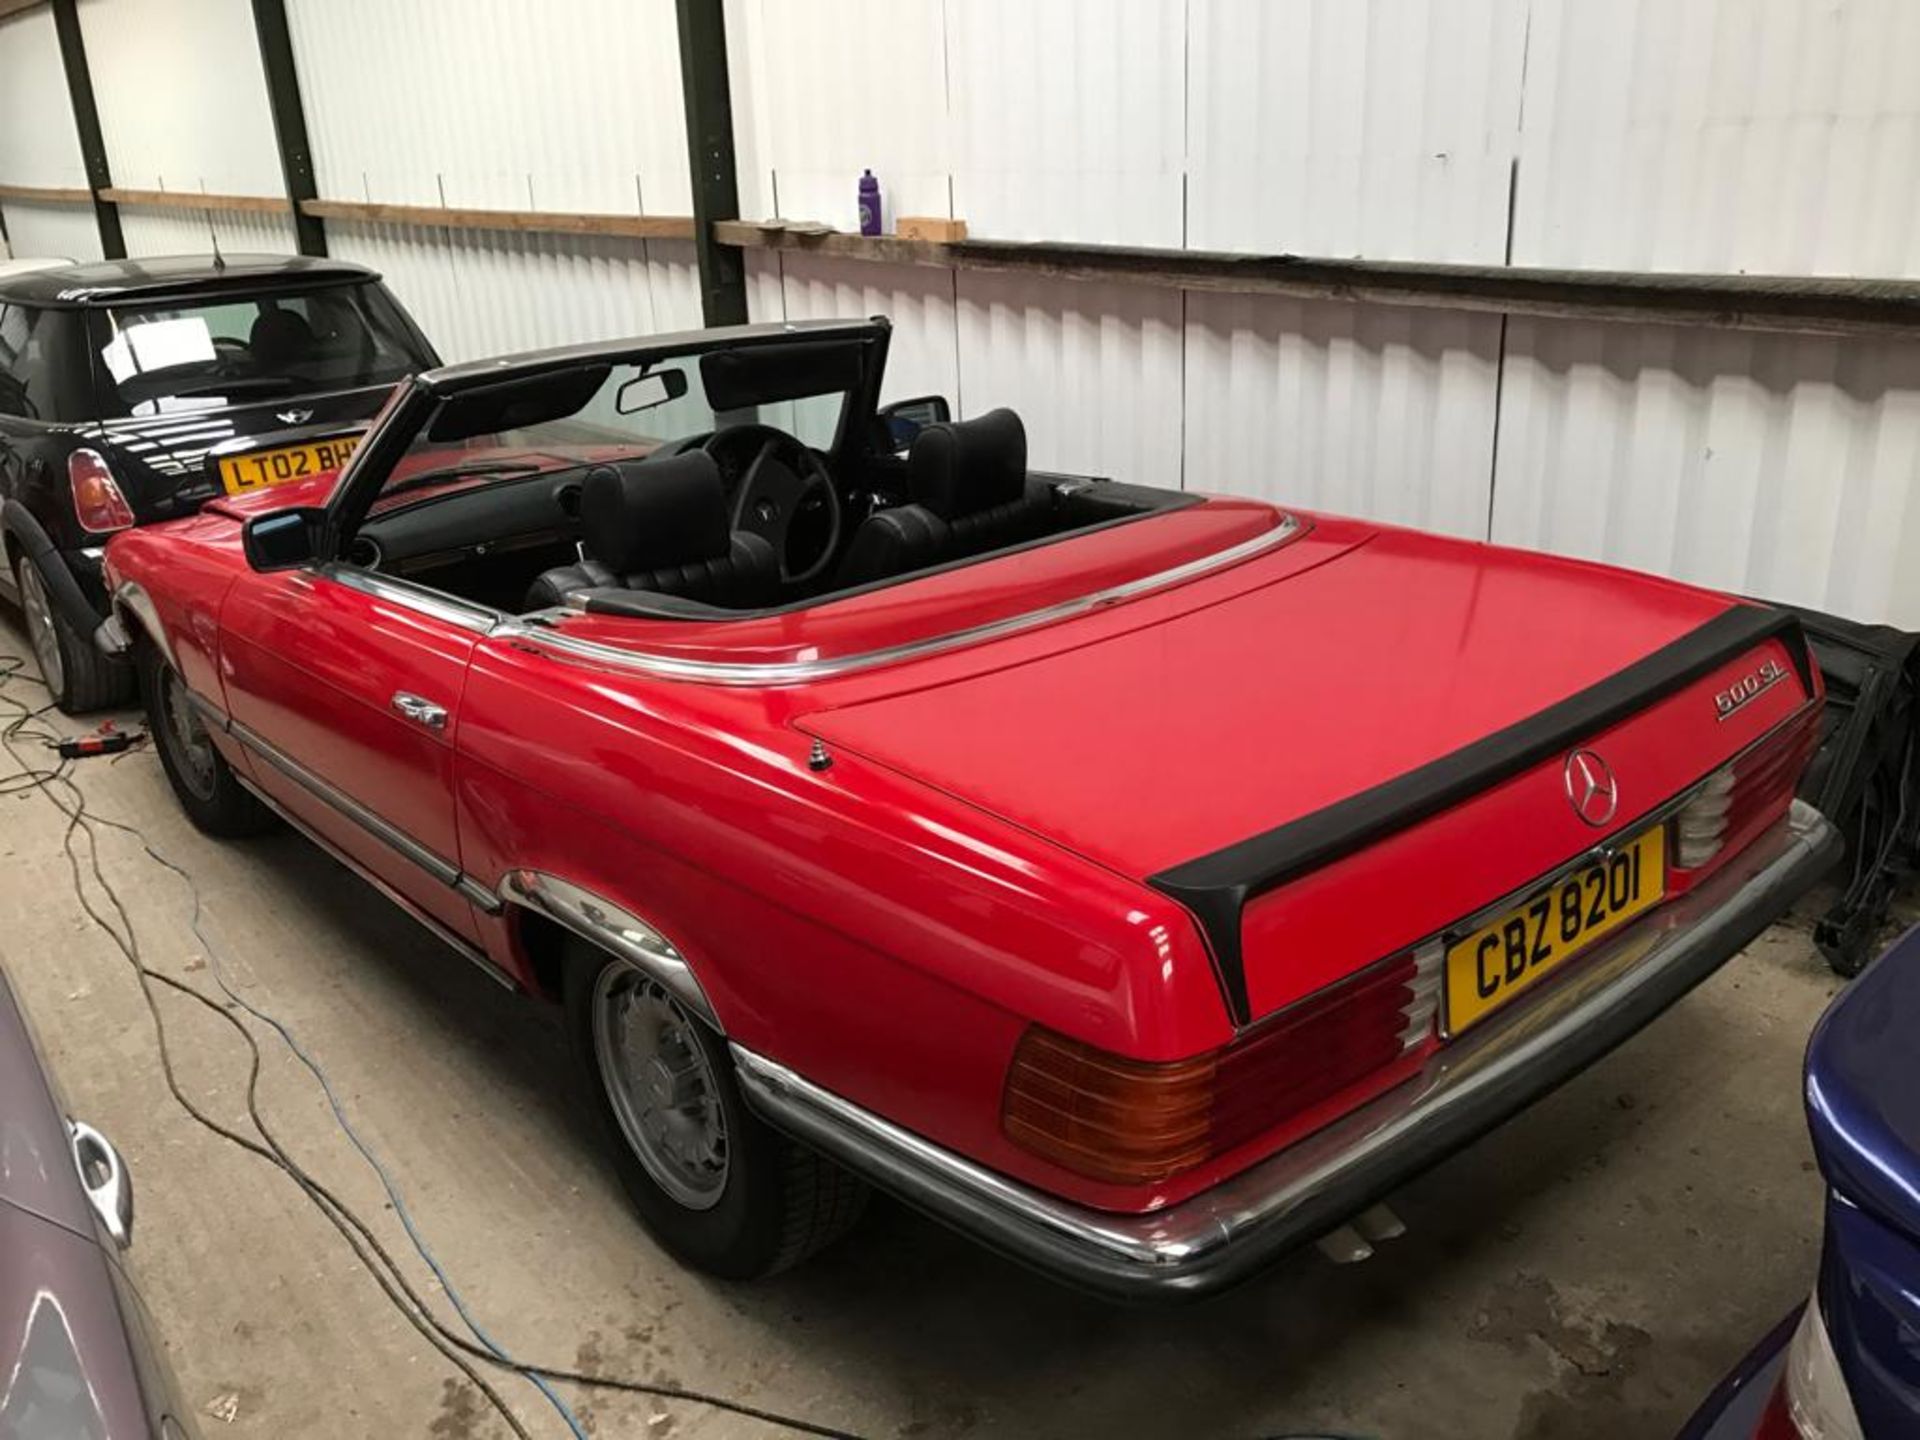 Mercedes 500SL R107 - 69,938 Miles - CL331 - Location: Manchester - No VAT on the hammer! This 500SL - Image 3 of 11